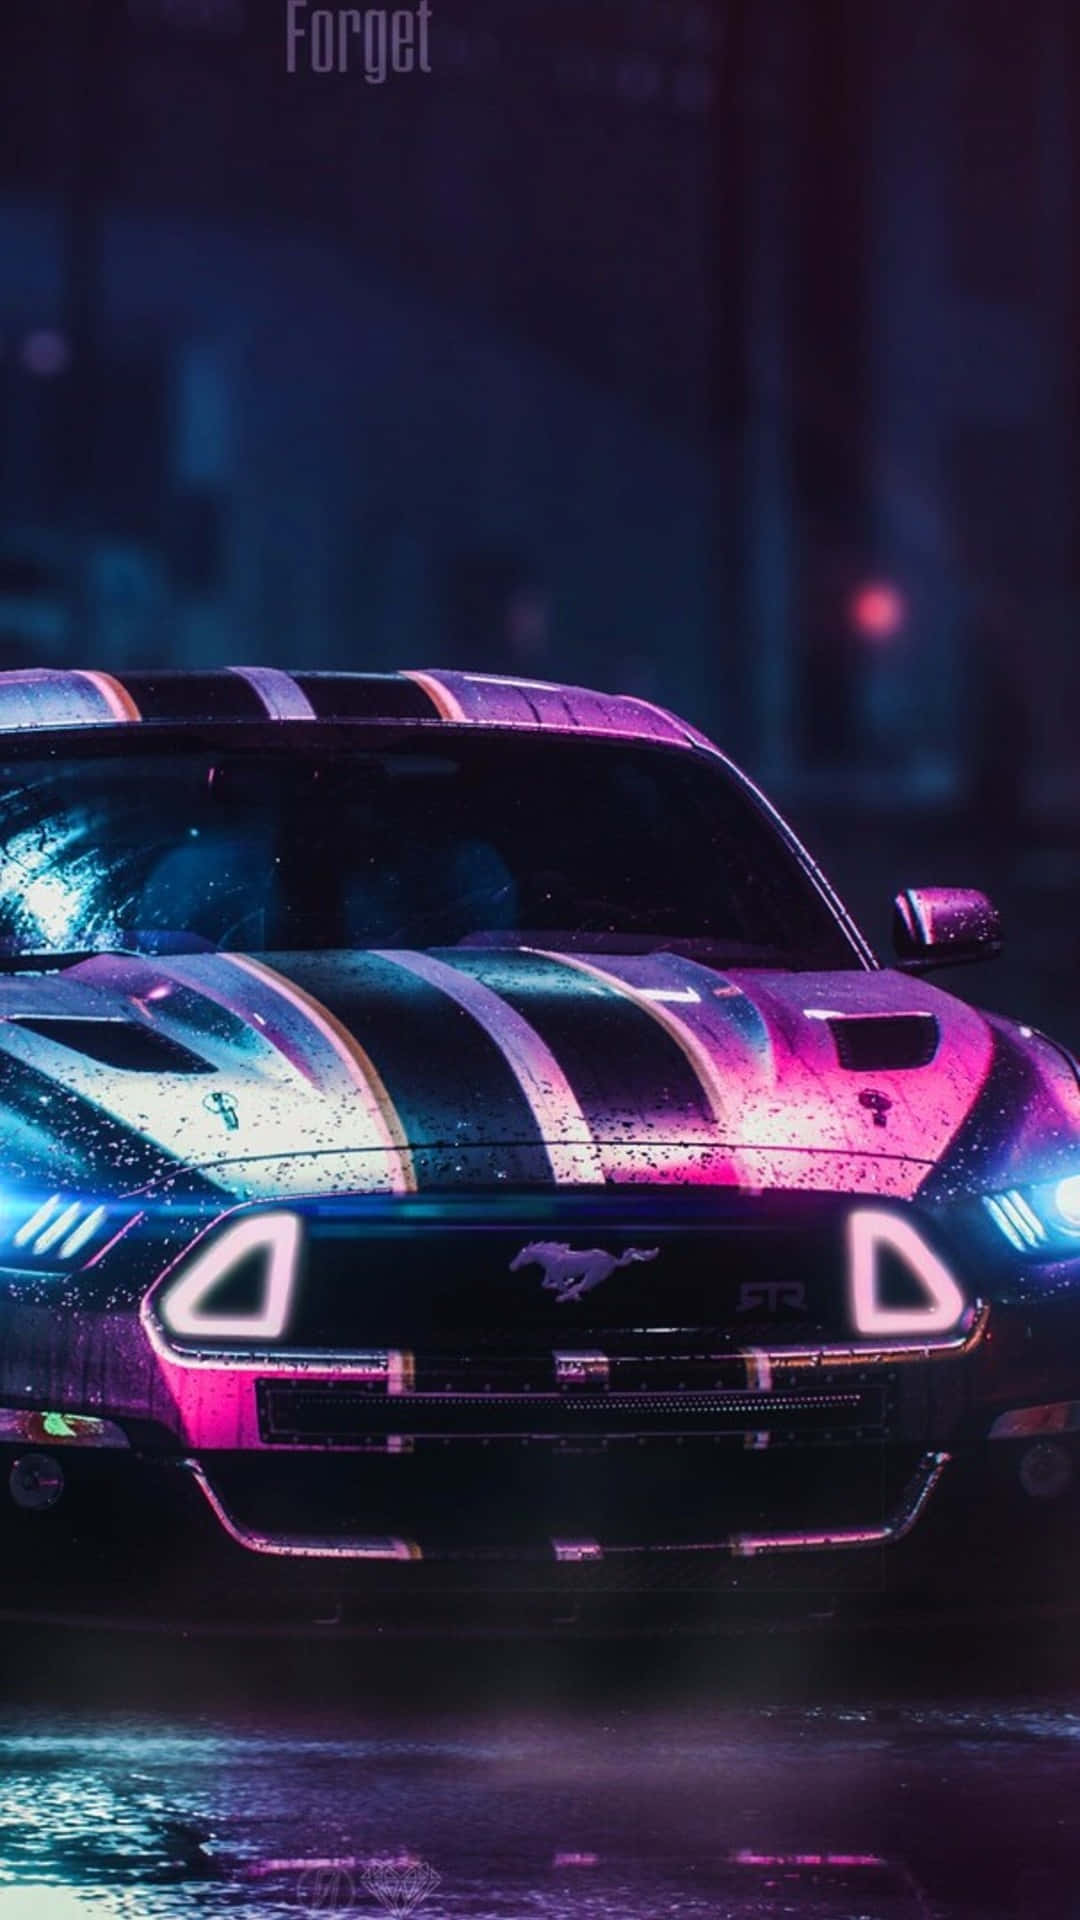 Windows 10 Users: Microsoft releases Ford Mustang RTR Formula Drift, a new  theme pack for your PC - MSPoweruser